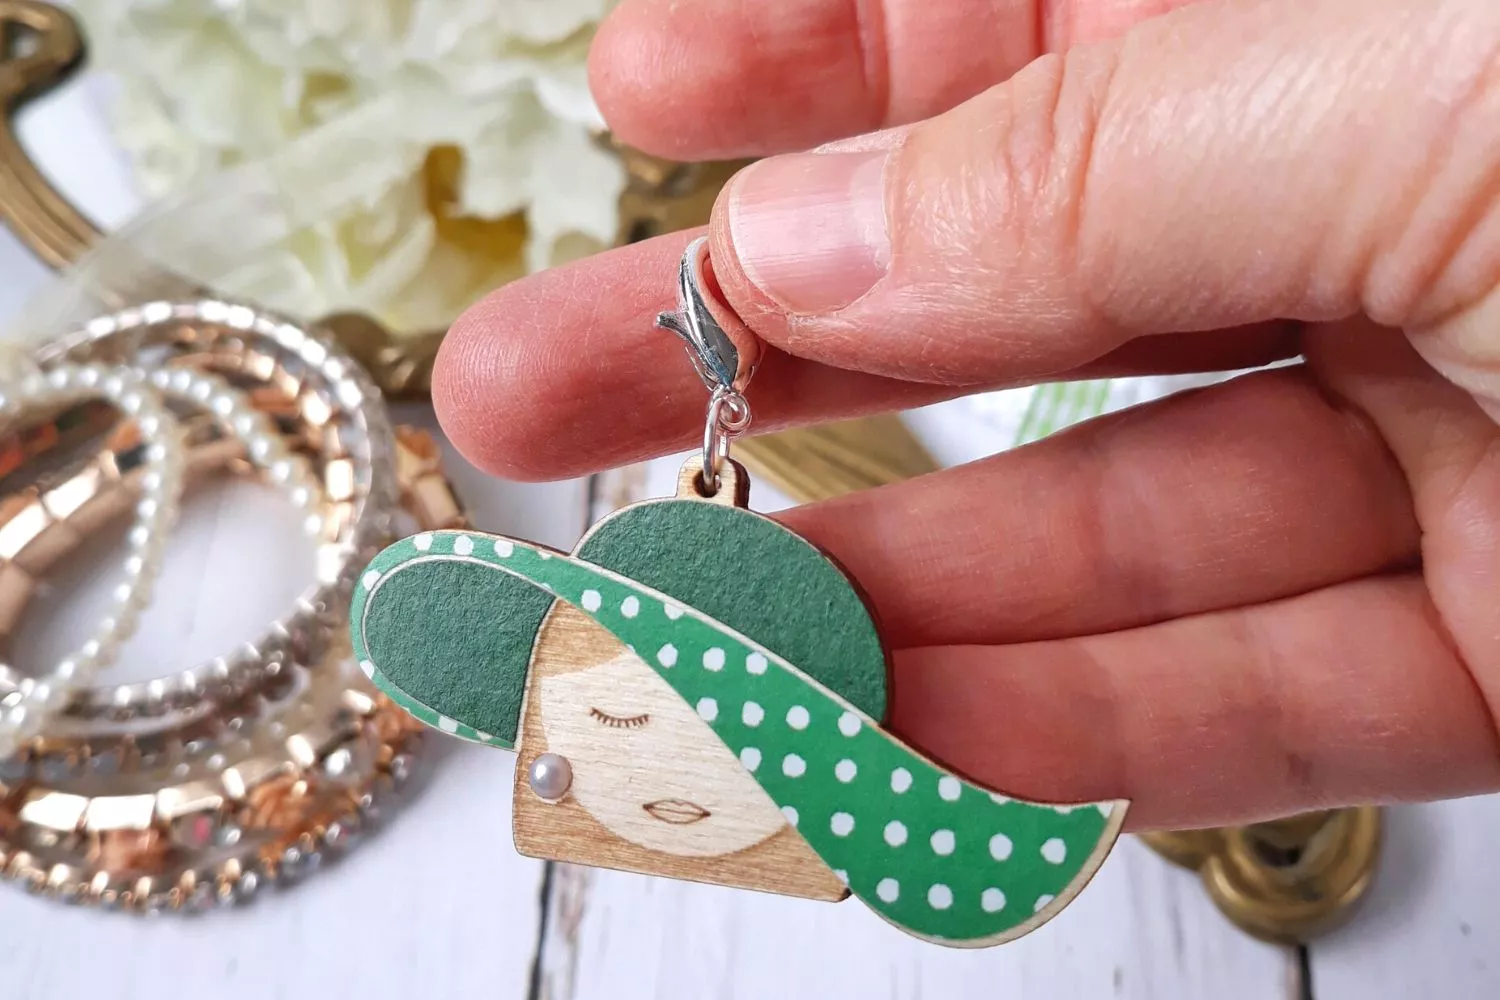 This could be the exclusive stitch marker of the month!